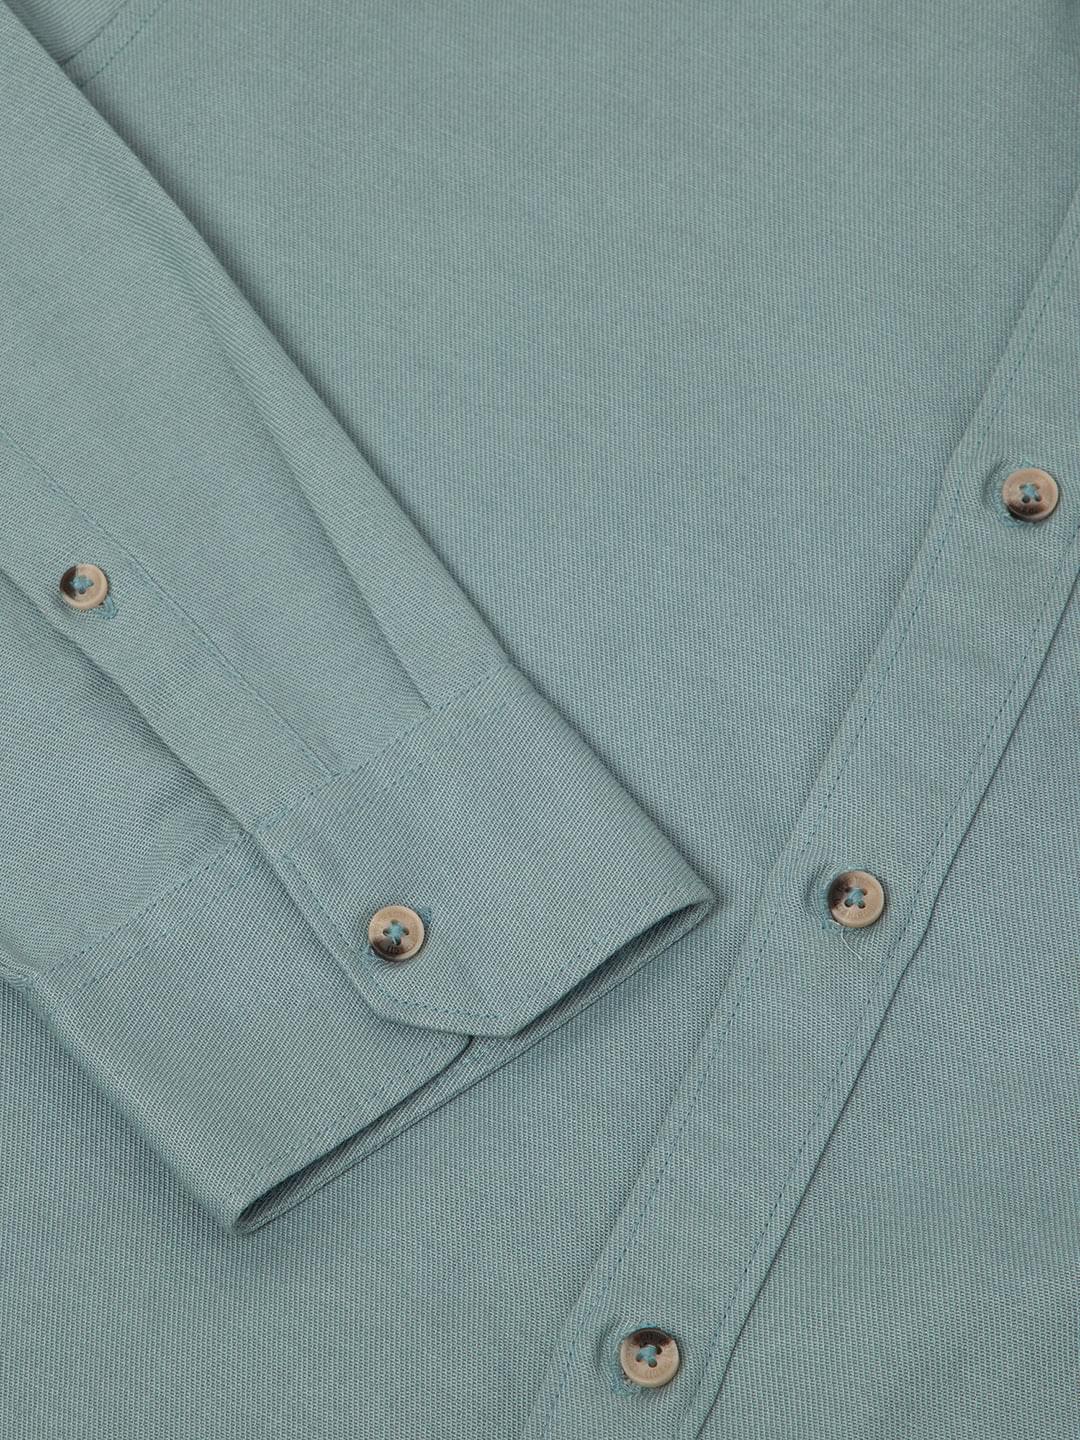 All Day Casual Cotton Linen Shirt in Sea Green- Comfort Fit